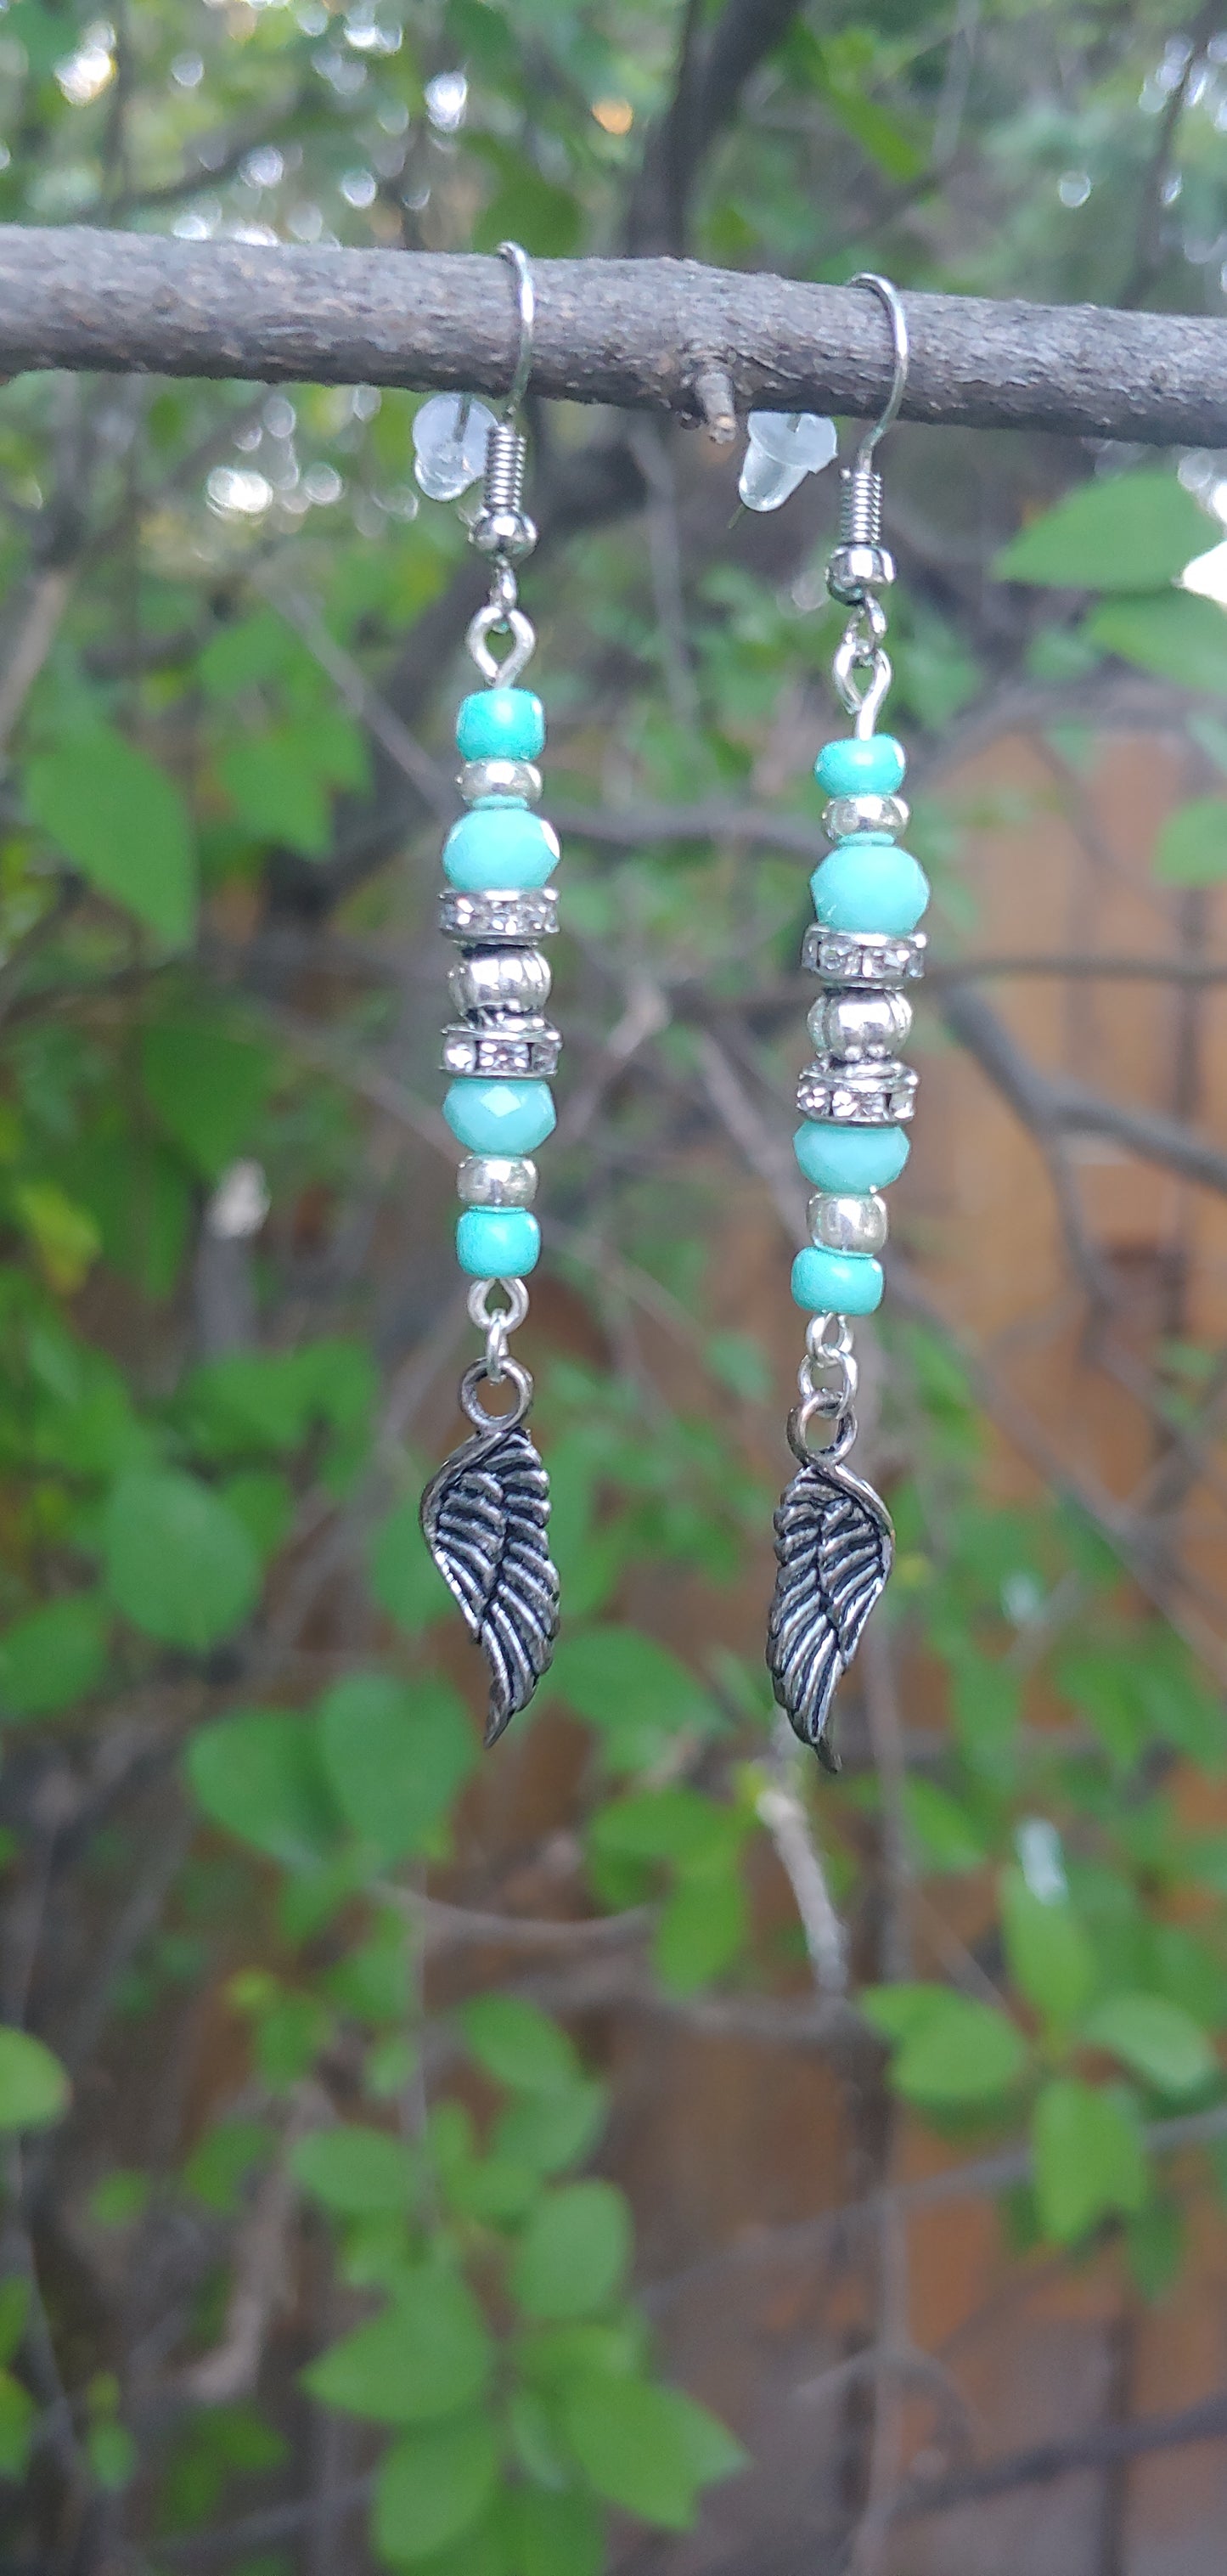 Teal Feather Wing Earrings